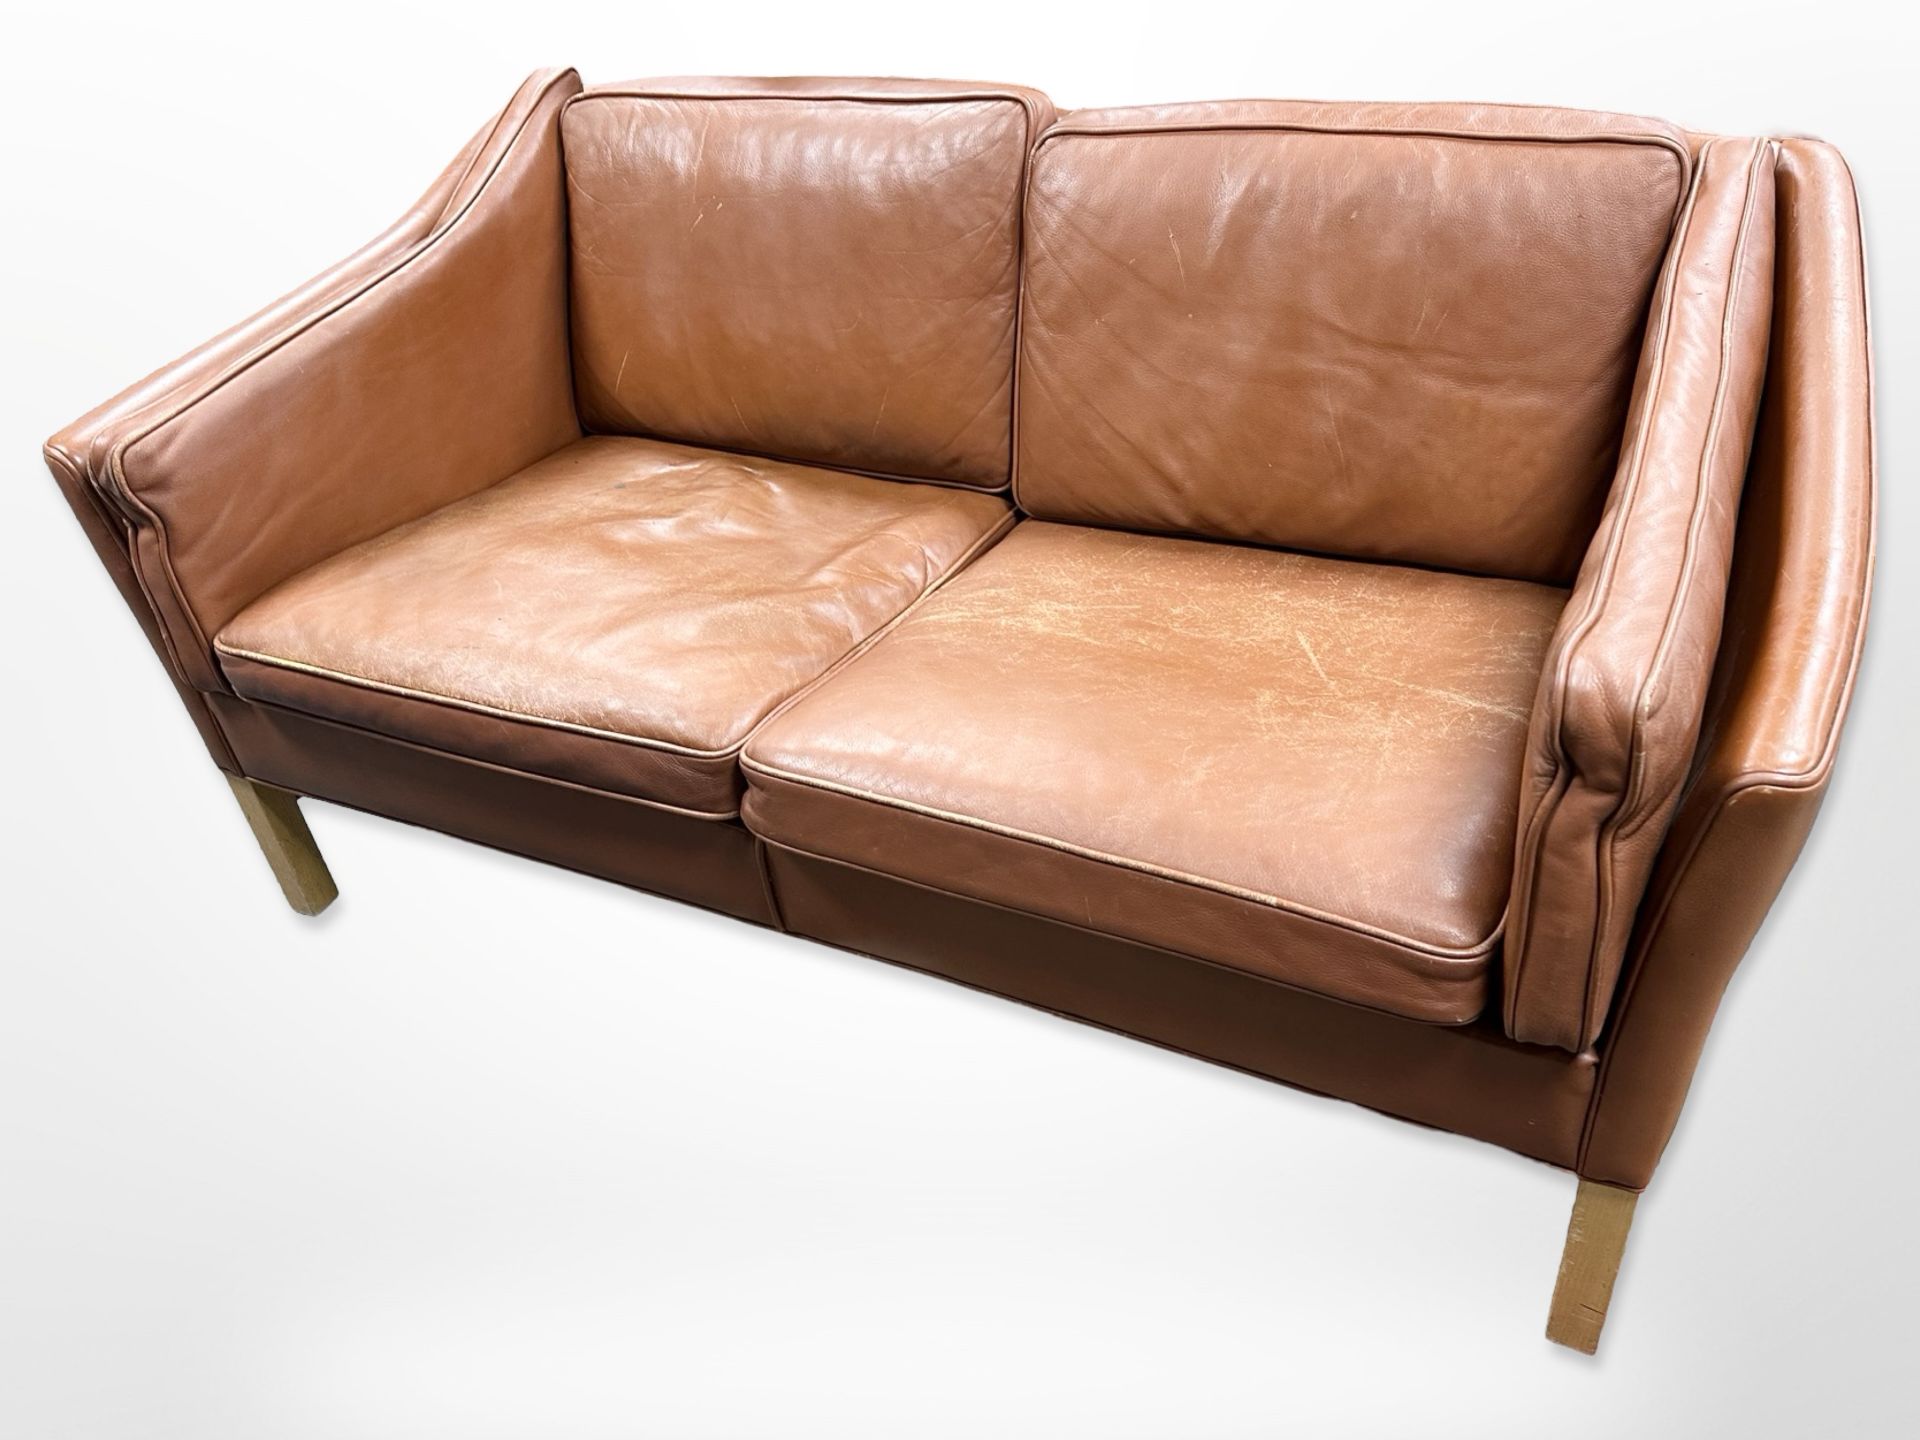 A late 20th-century Danish terracotta leather two-seater settee, length 154cm x depth 80cm x 71cm.